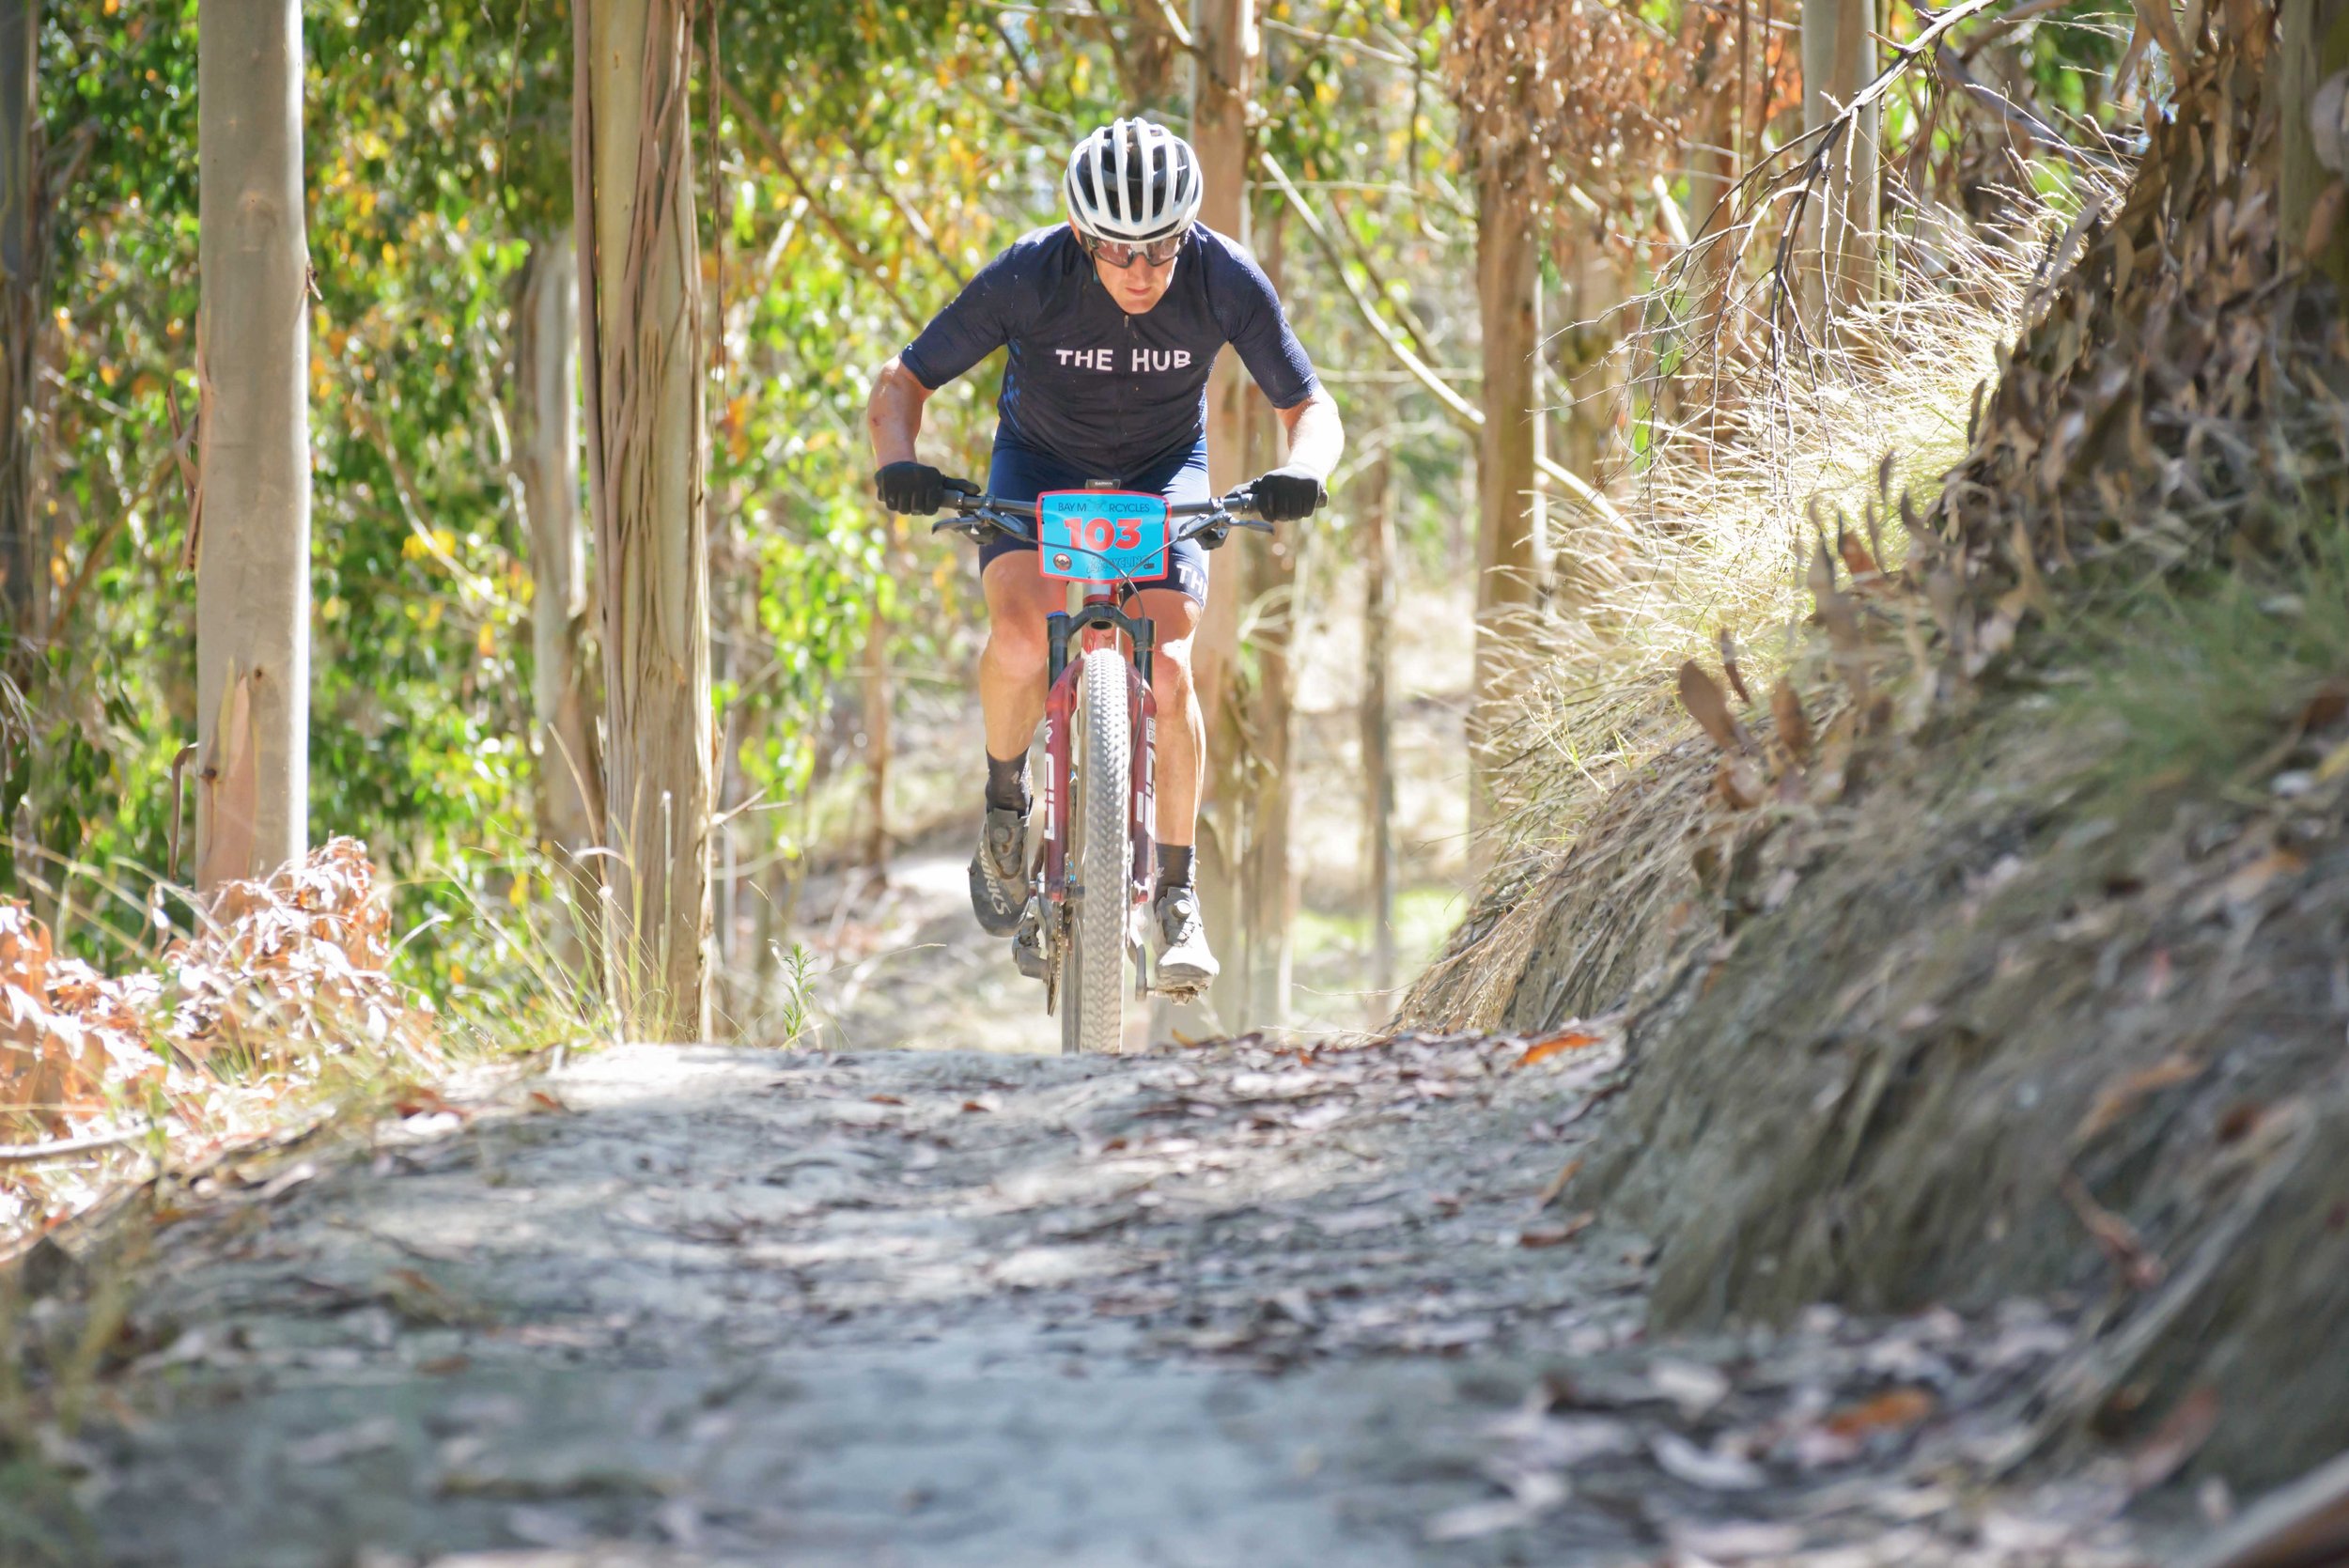 Competing in the CHB Cycling Mountain Bike Challenge 2022